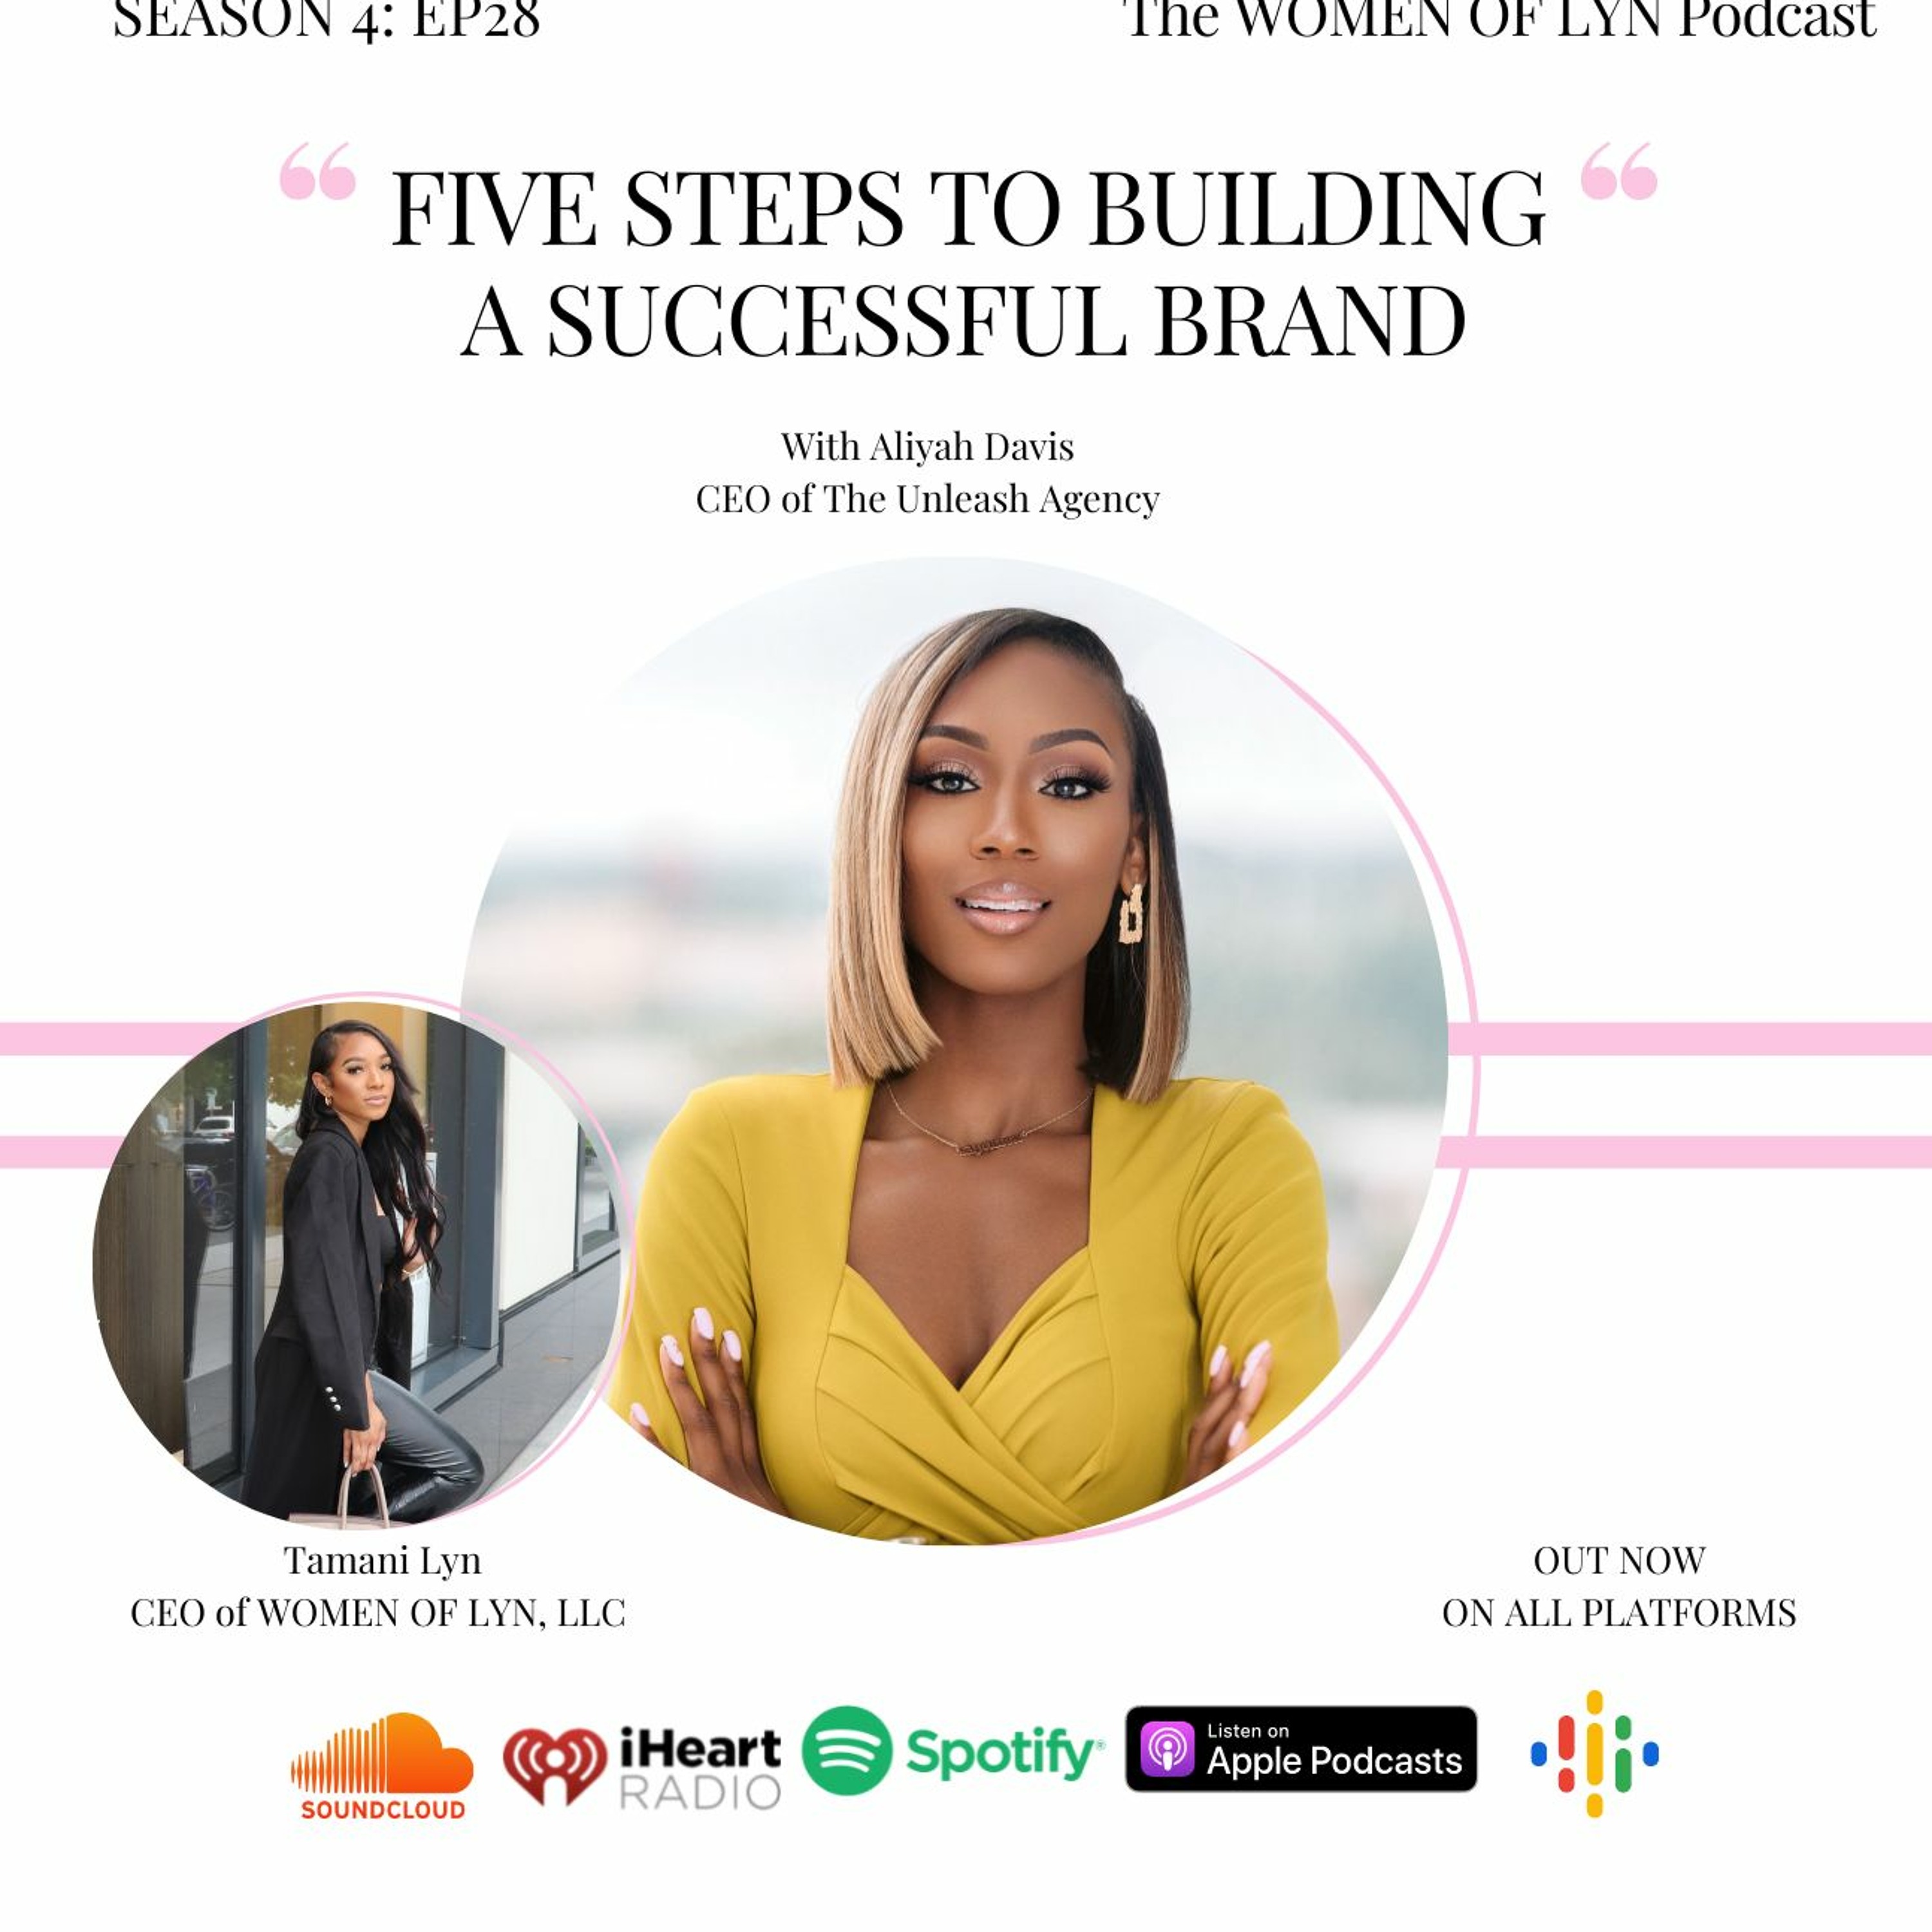 Episode 28: ’Five Steps To Building A Successful Brand’ Ft. Aliyah Davis